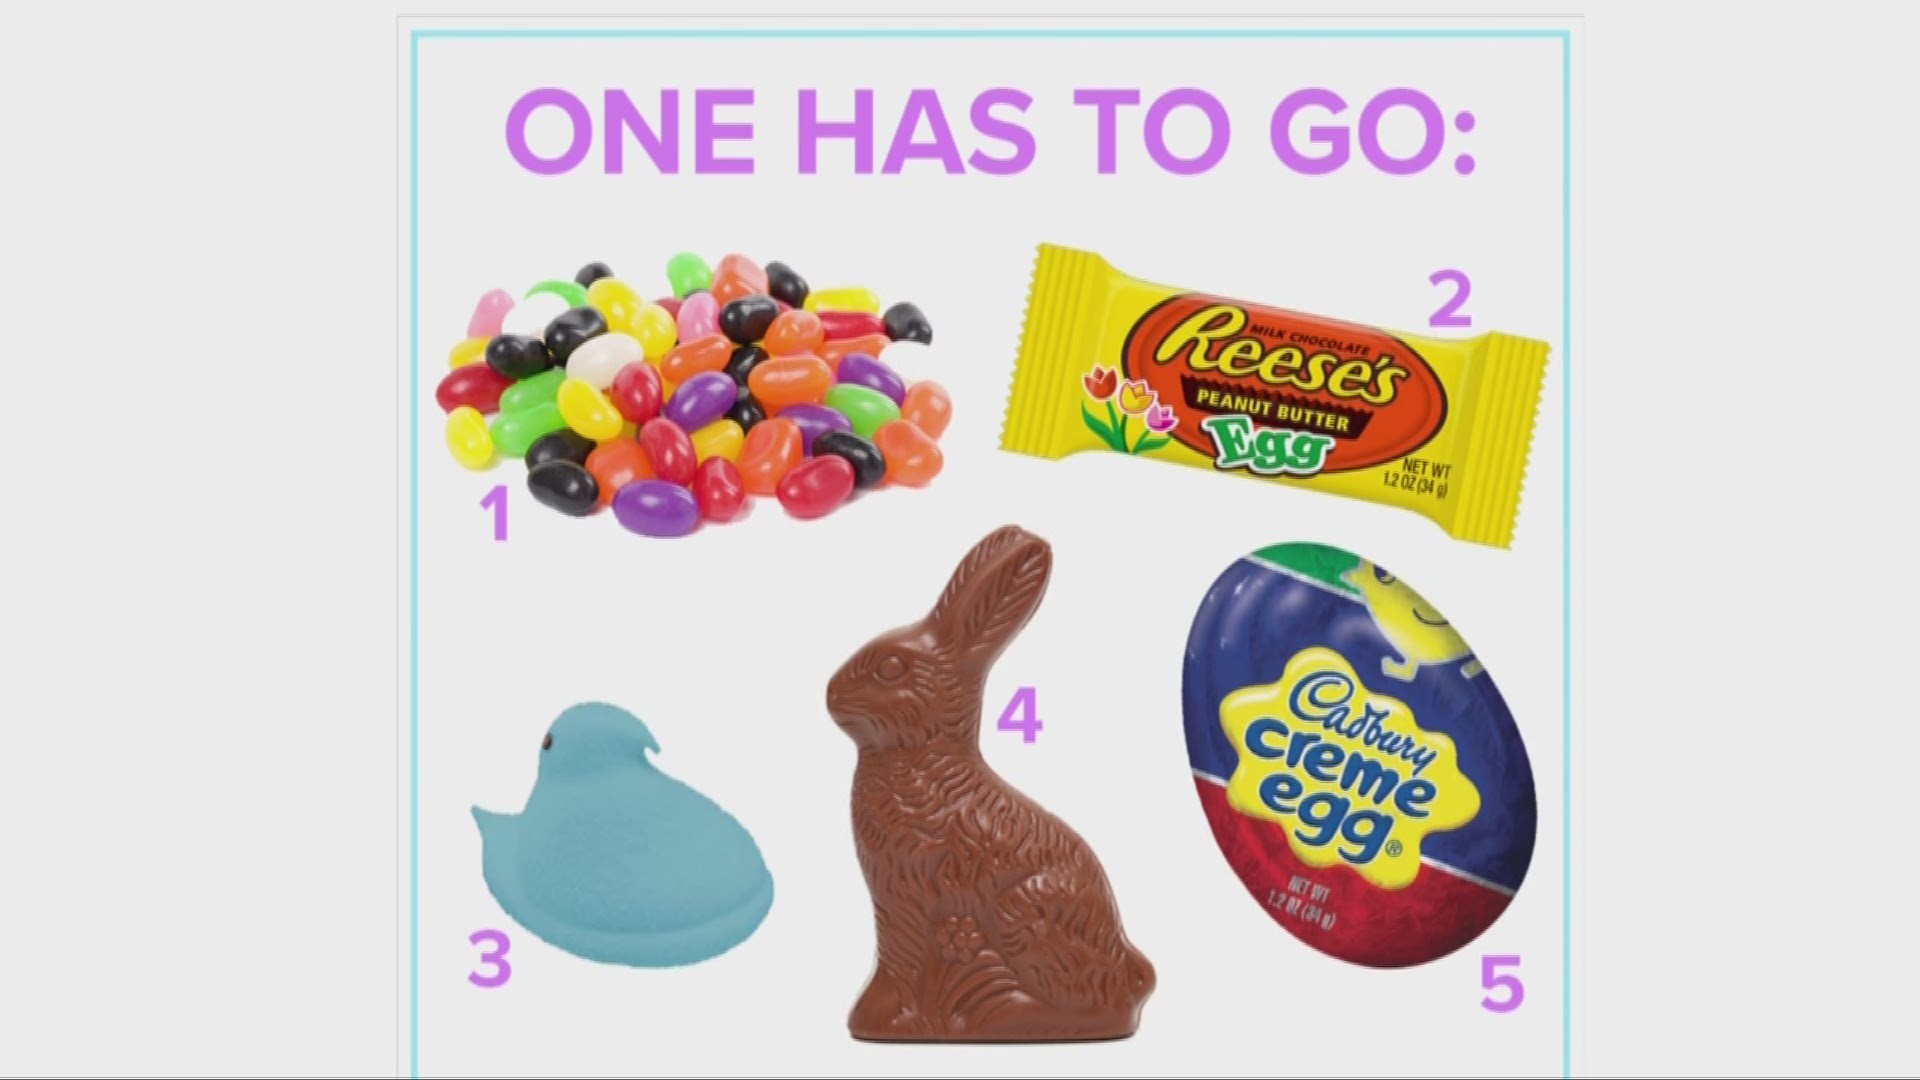 April 17, 2019: Thousands of you have been weighing in on social media. Which of these Easter candies would you get rid of forever?